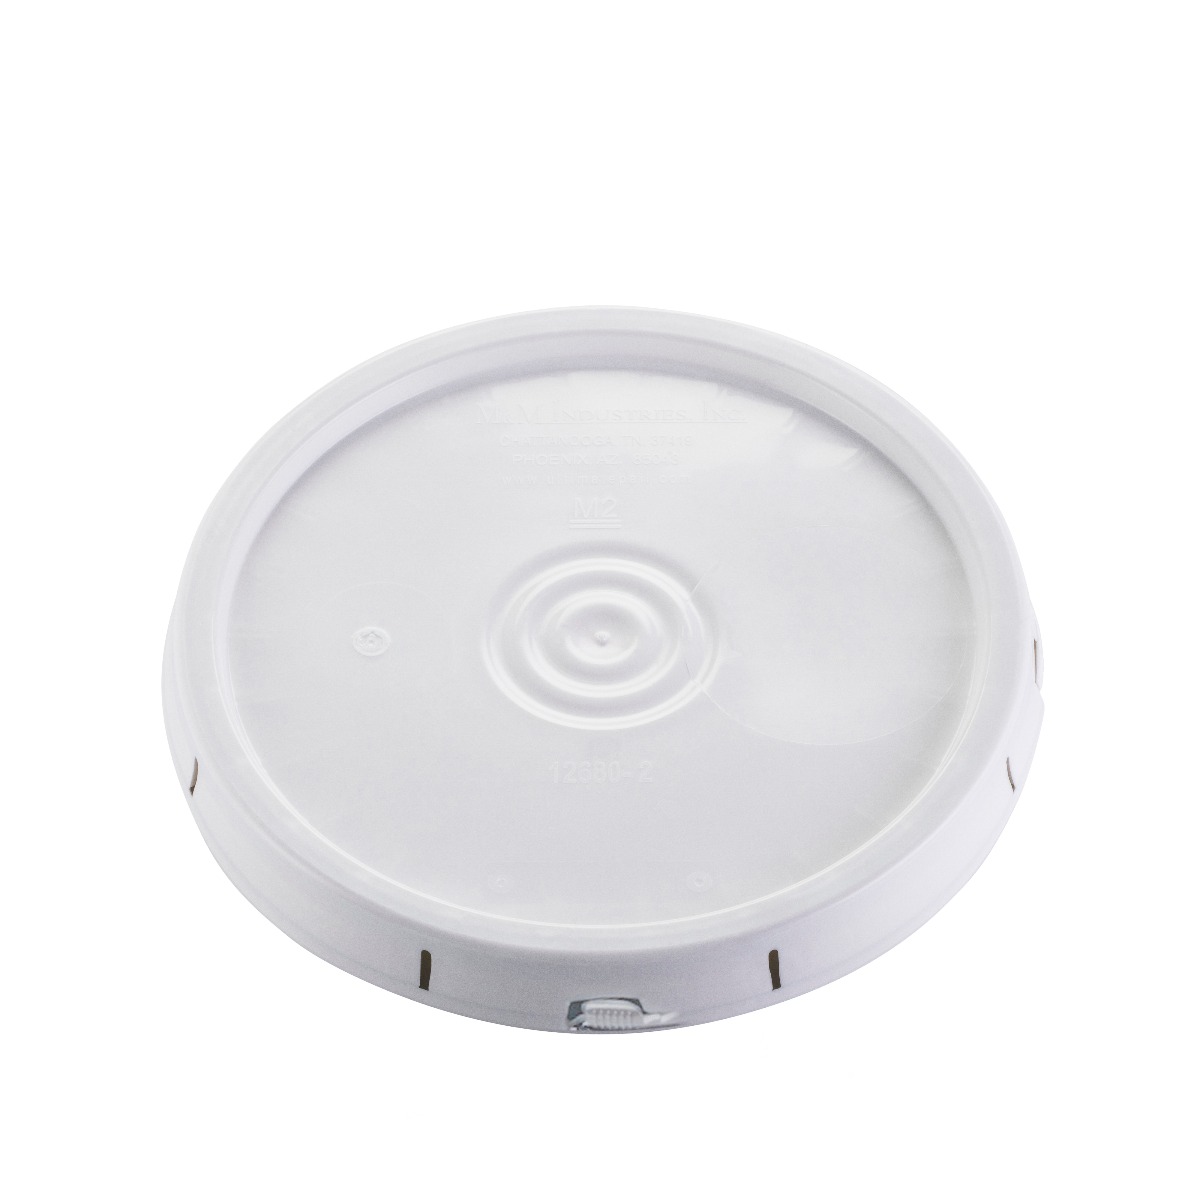 White container lid on white background